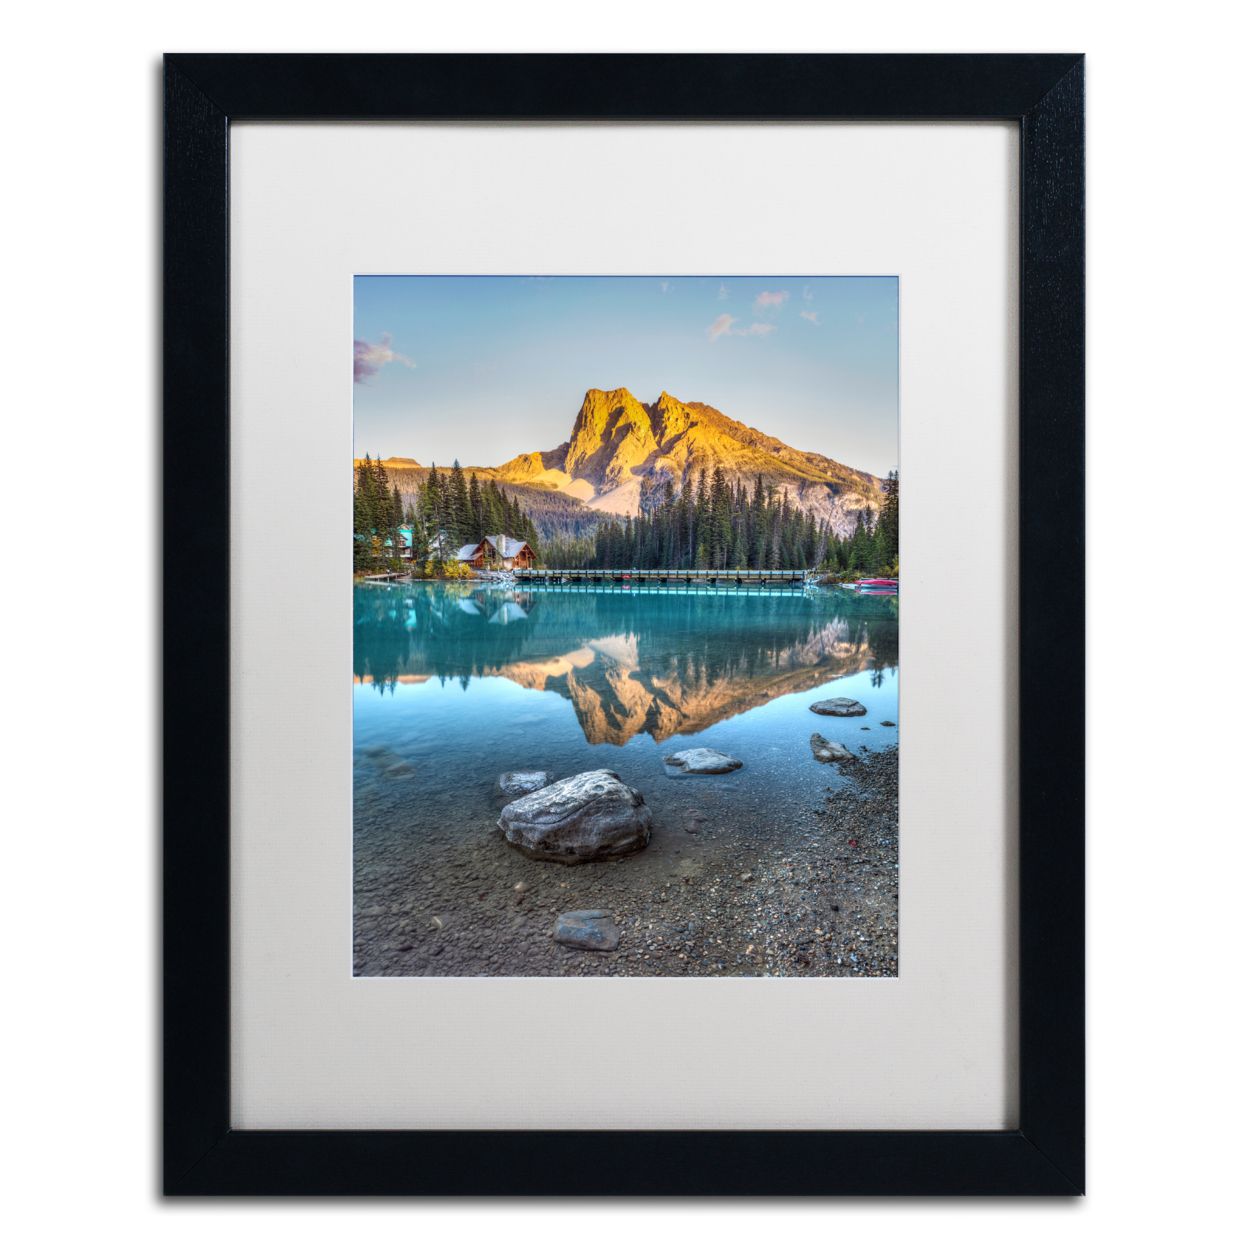 Pierre Leclerc 'Emerald Lake Sunset' Black Wooden Framed Art 18 X 22 Inches